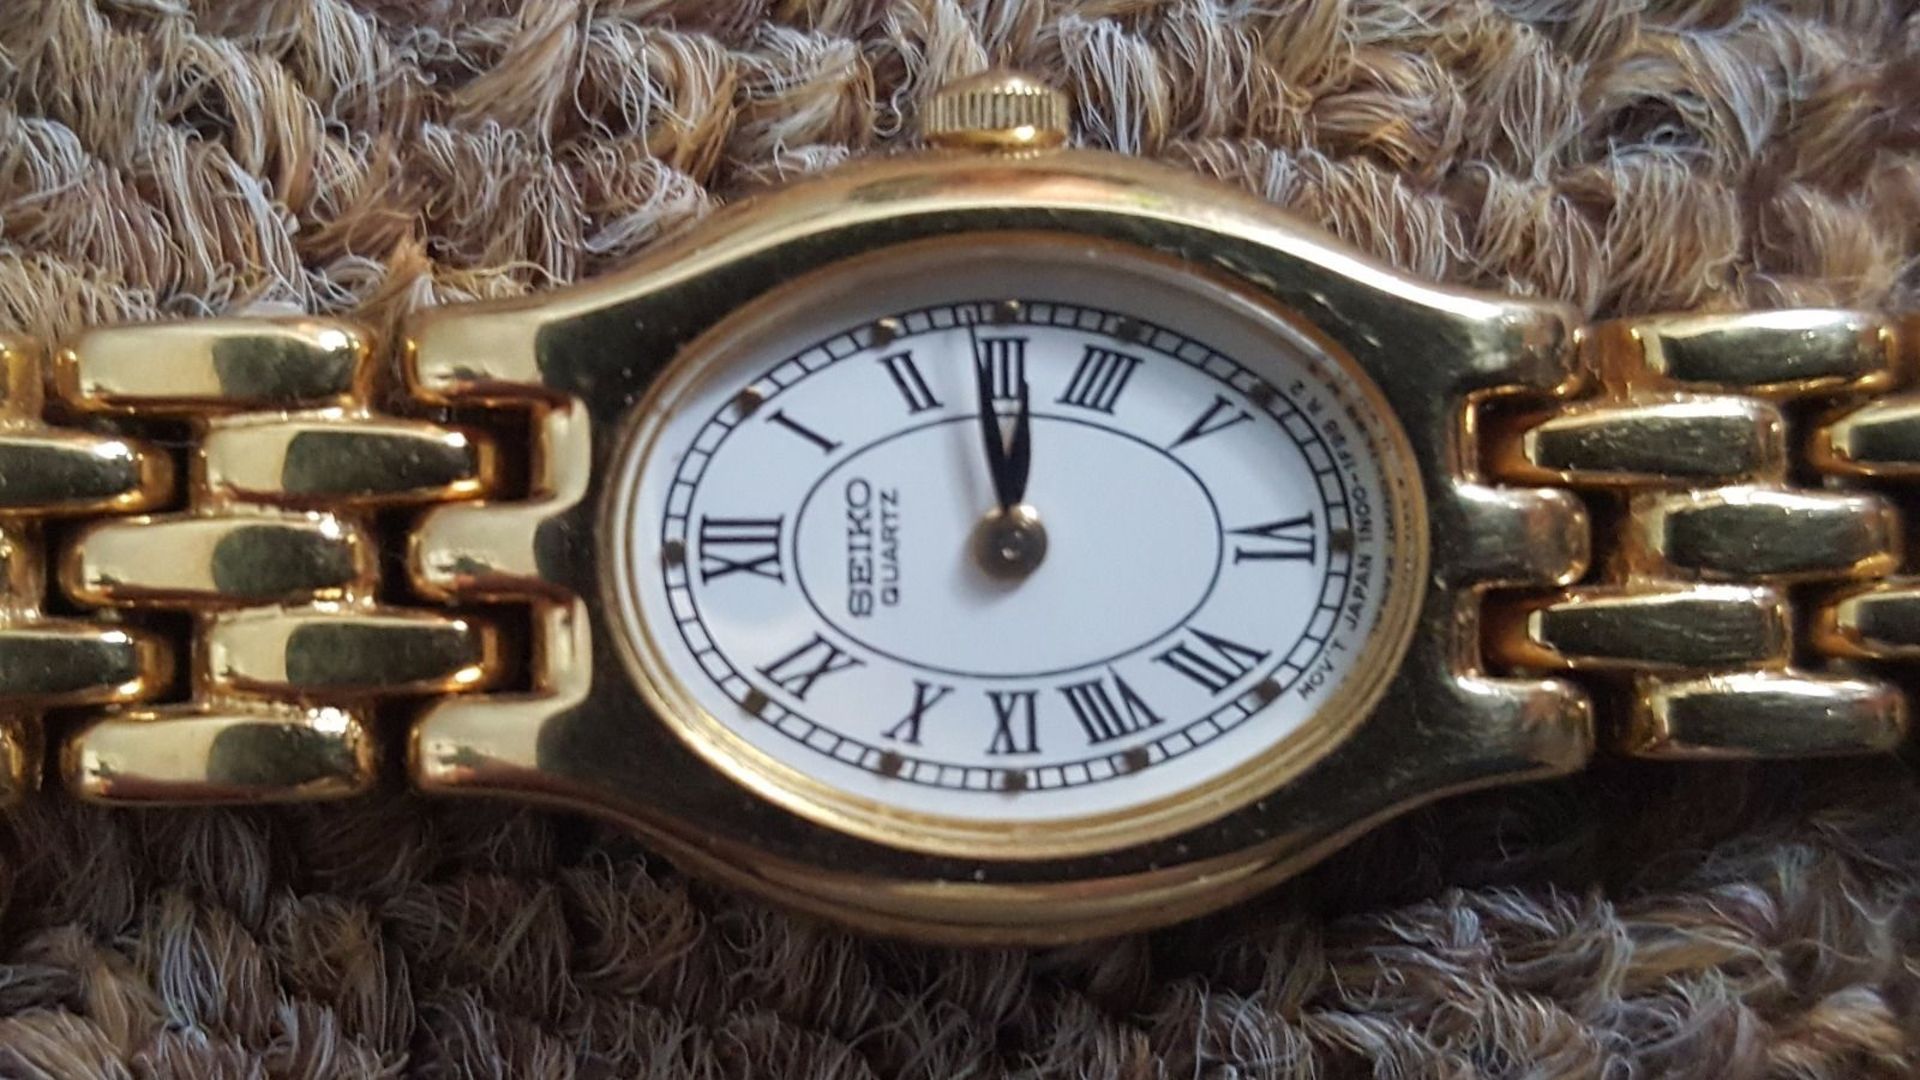 SEIKO WATCH   GOOD CONDITION, MINOR MARKS   1st CLASS RECORDED DELIVERY £9.99 - Image 5 of 5